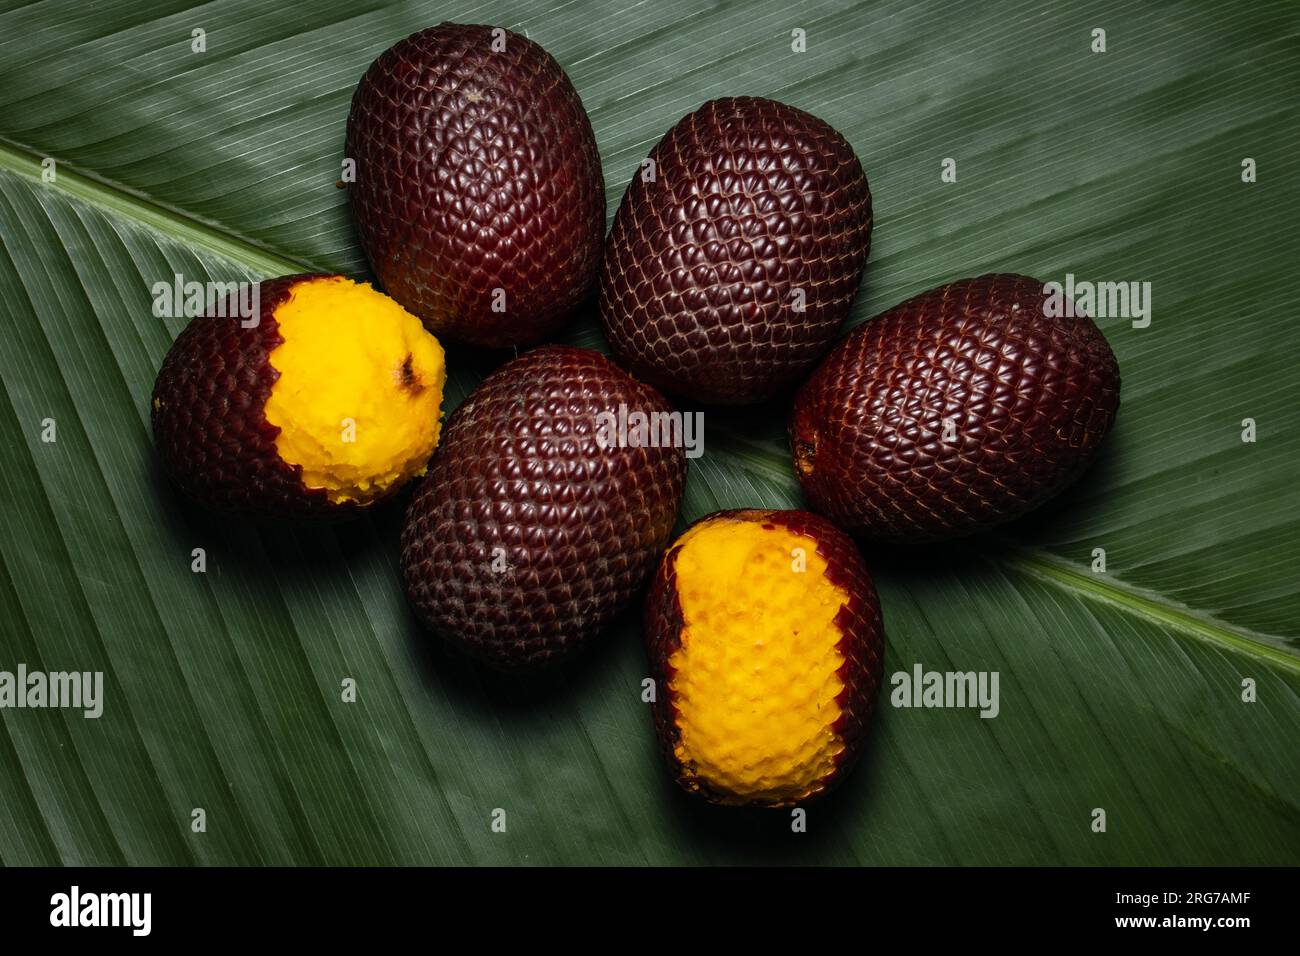 Buruti is a fruit widely consumed in the Amazon, it is nutritious and has many properties that make it very delicious. Stock Photo